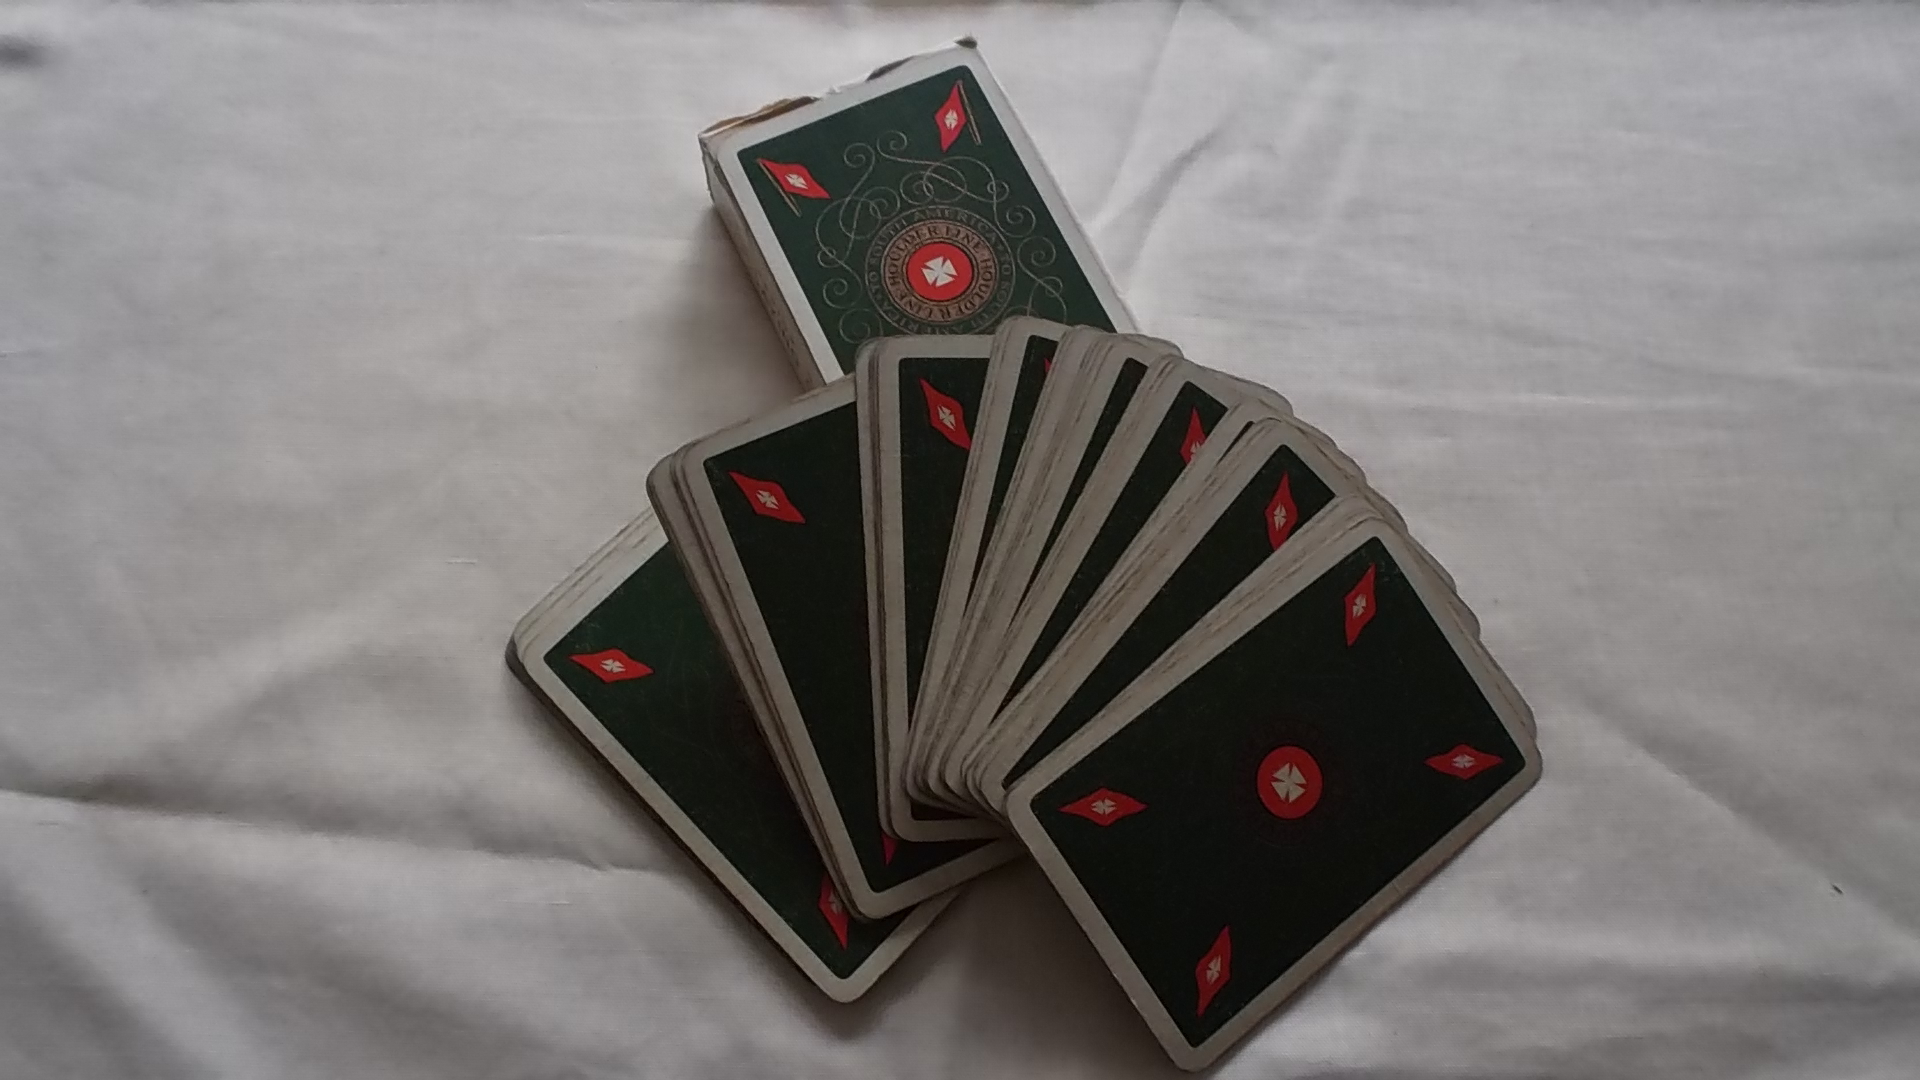 SET OF PLAYING CARDS FROM THE HOULDER LINE SHIPPING COMPANY